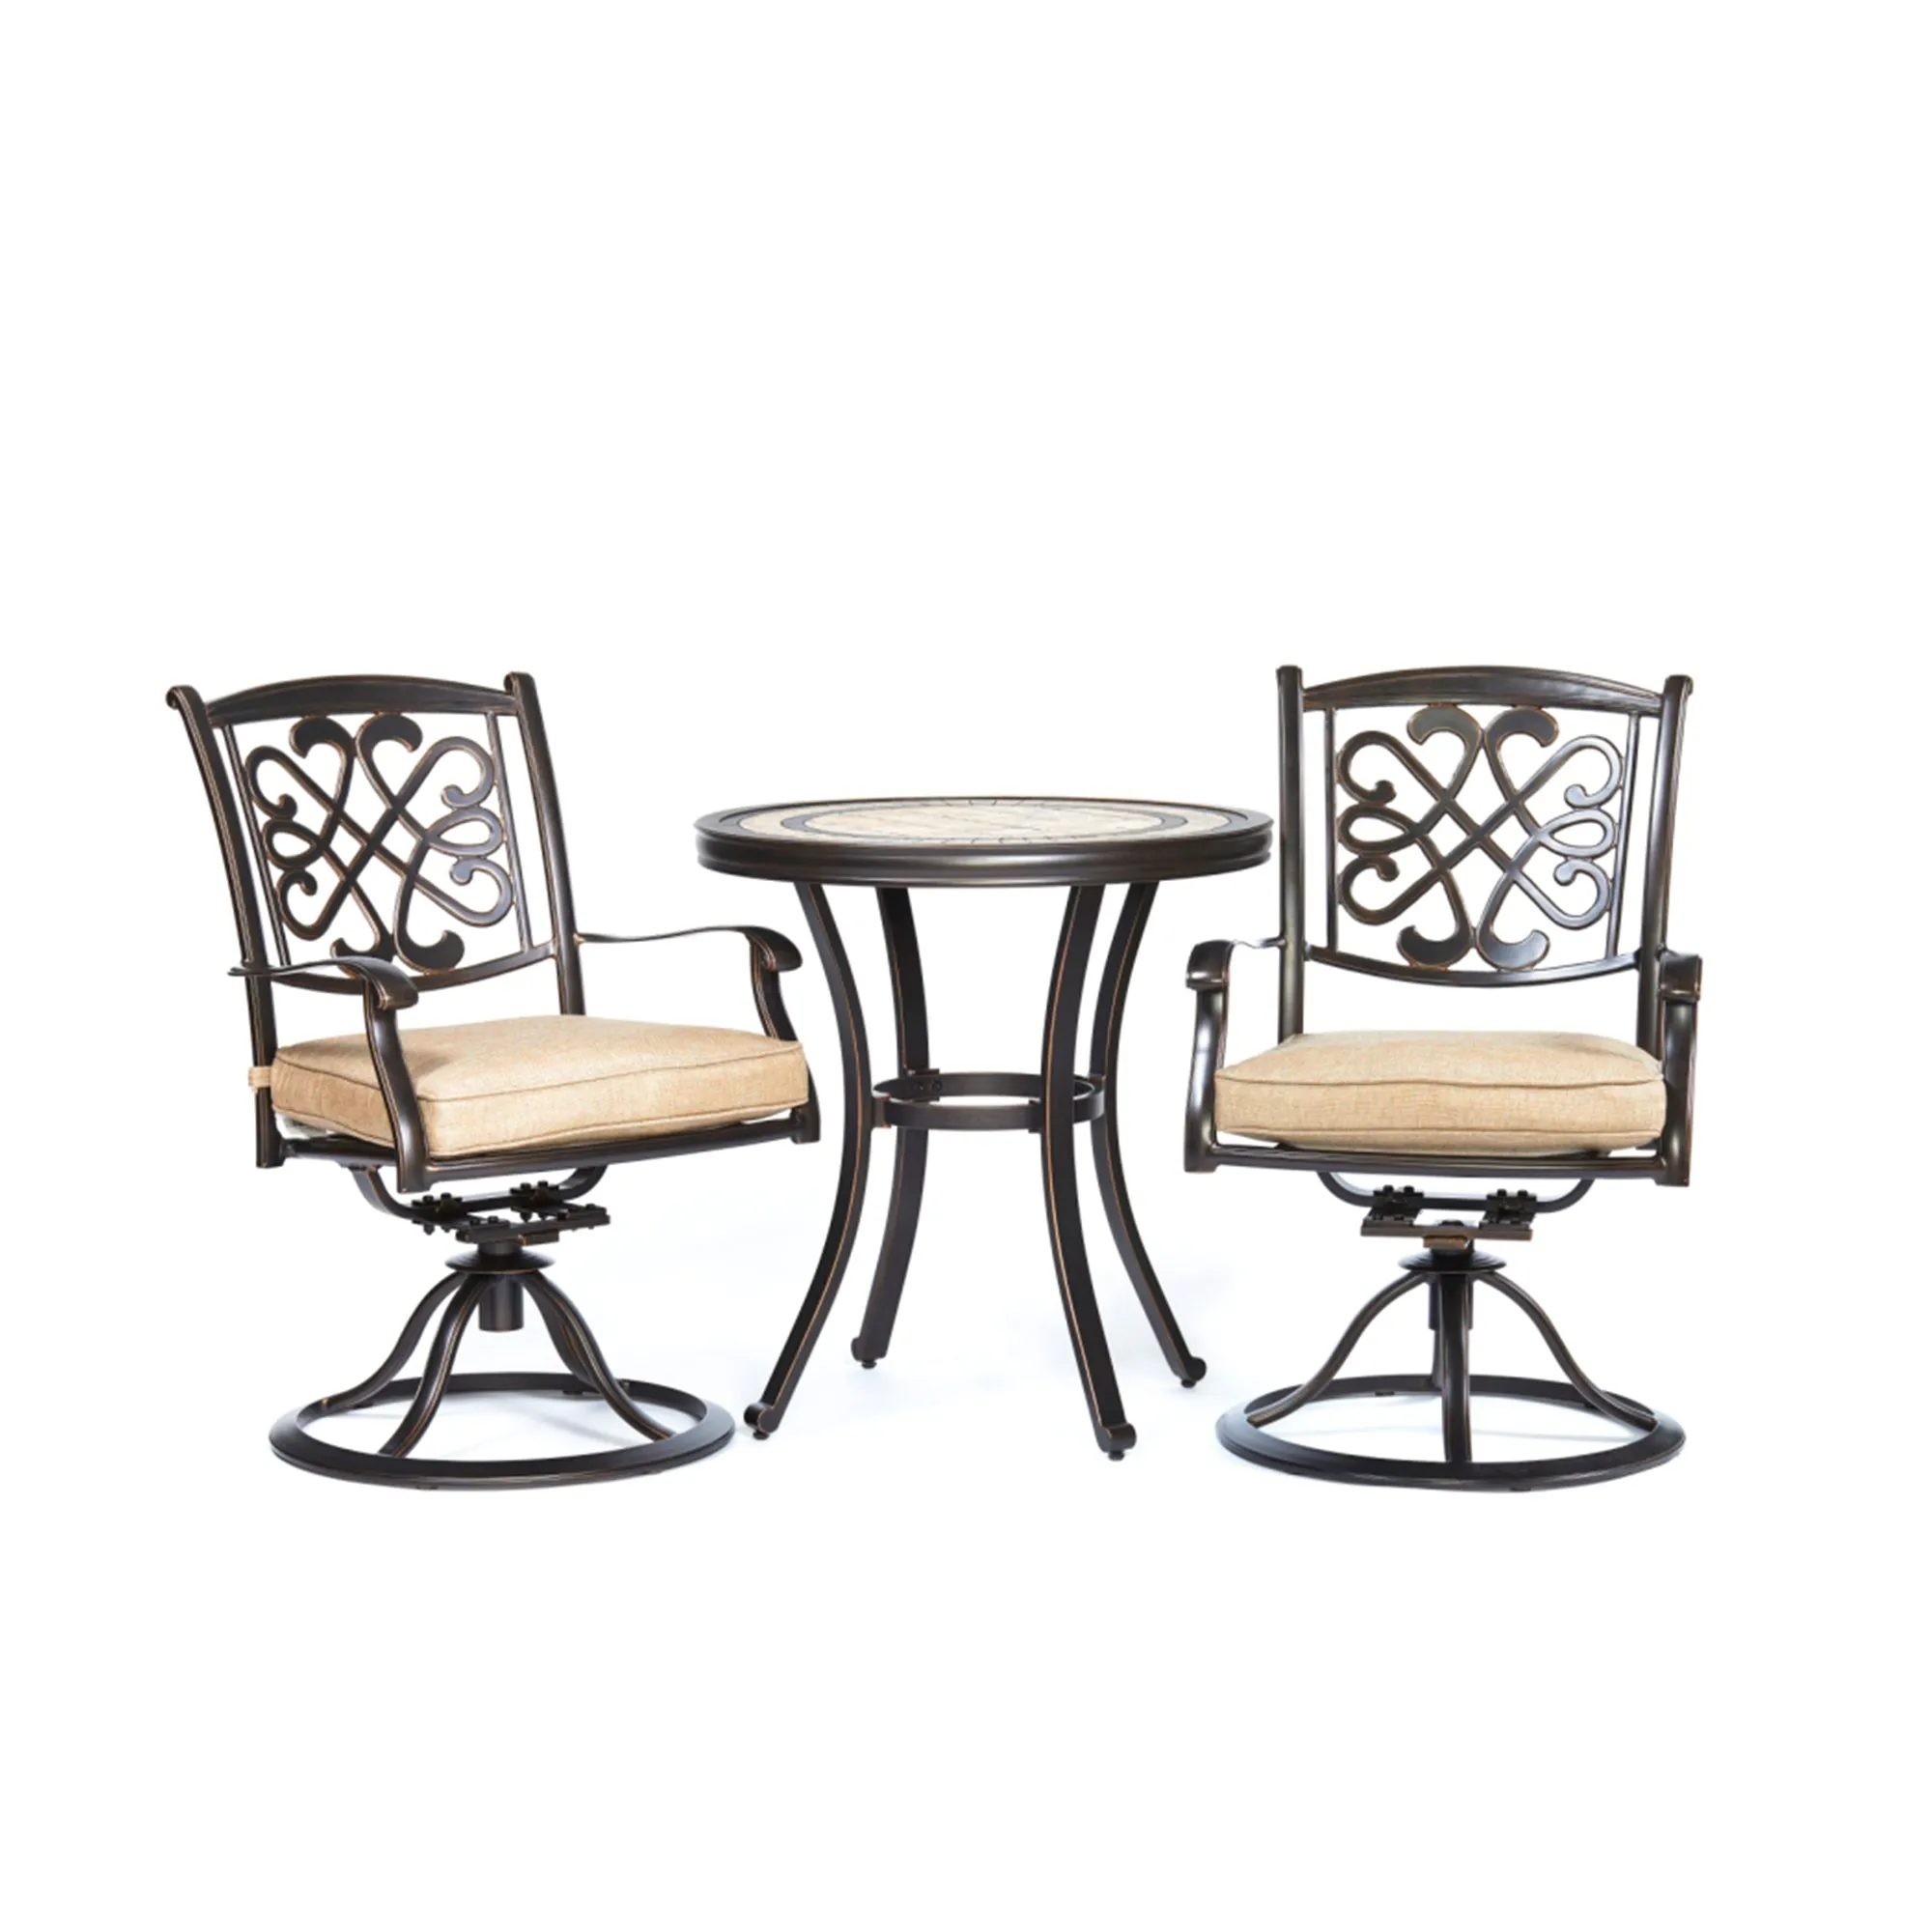 MONDAWE 3-Piece Cast Aluminum Round 28 in. H Outdoor Bistro Set with Swivel Metal Chairs with Beige Cushion